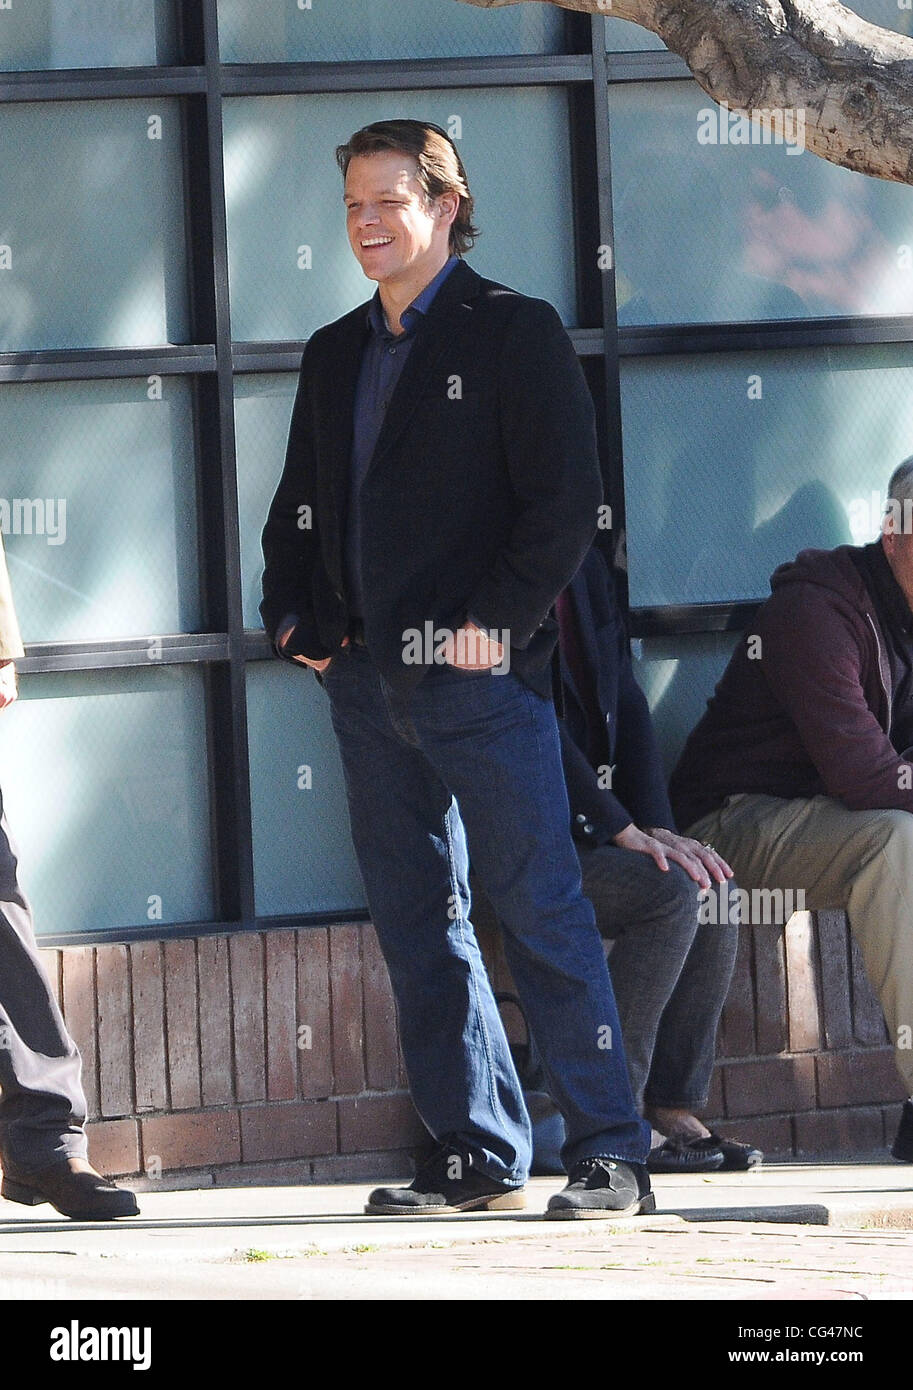 Matt Damon on the set of 'We Bought a Zoo' in Los Angeles Los Angeles,  California - 24.01.11 Stock Photo - Alamy